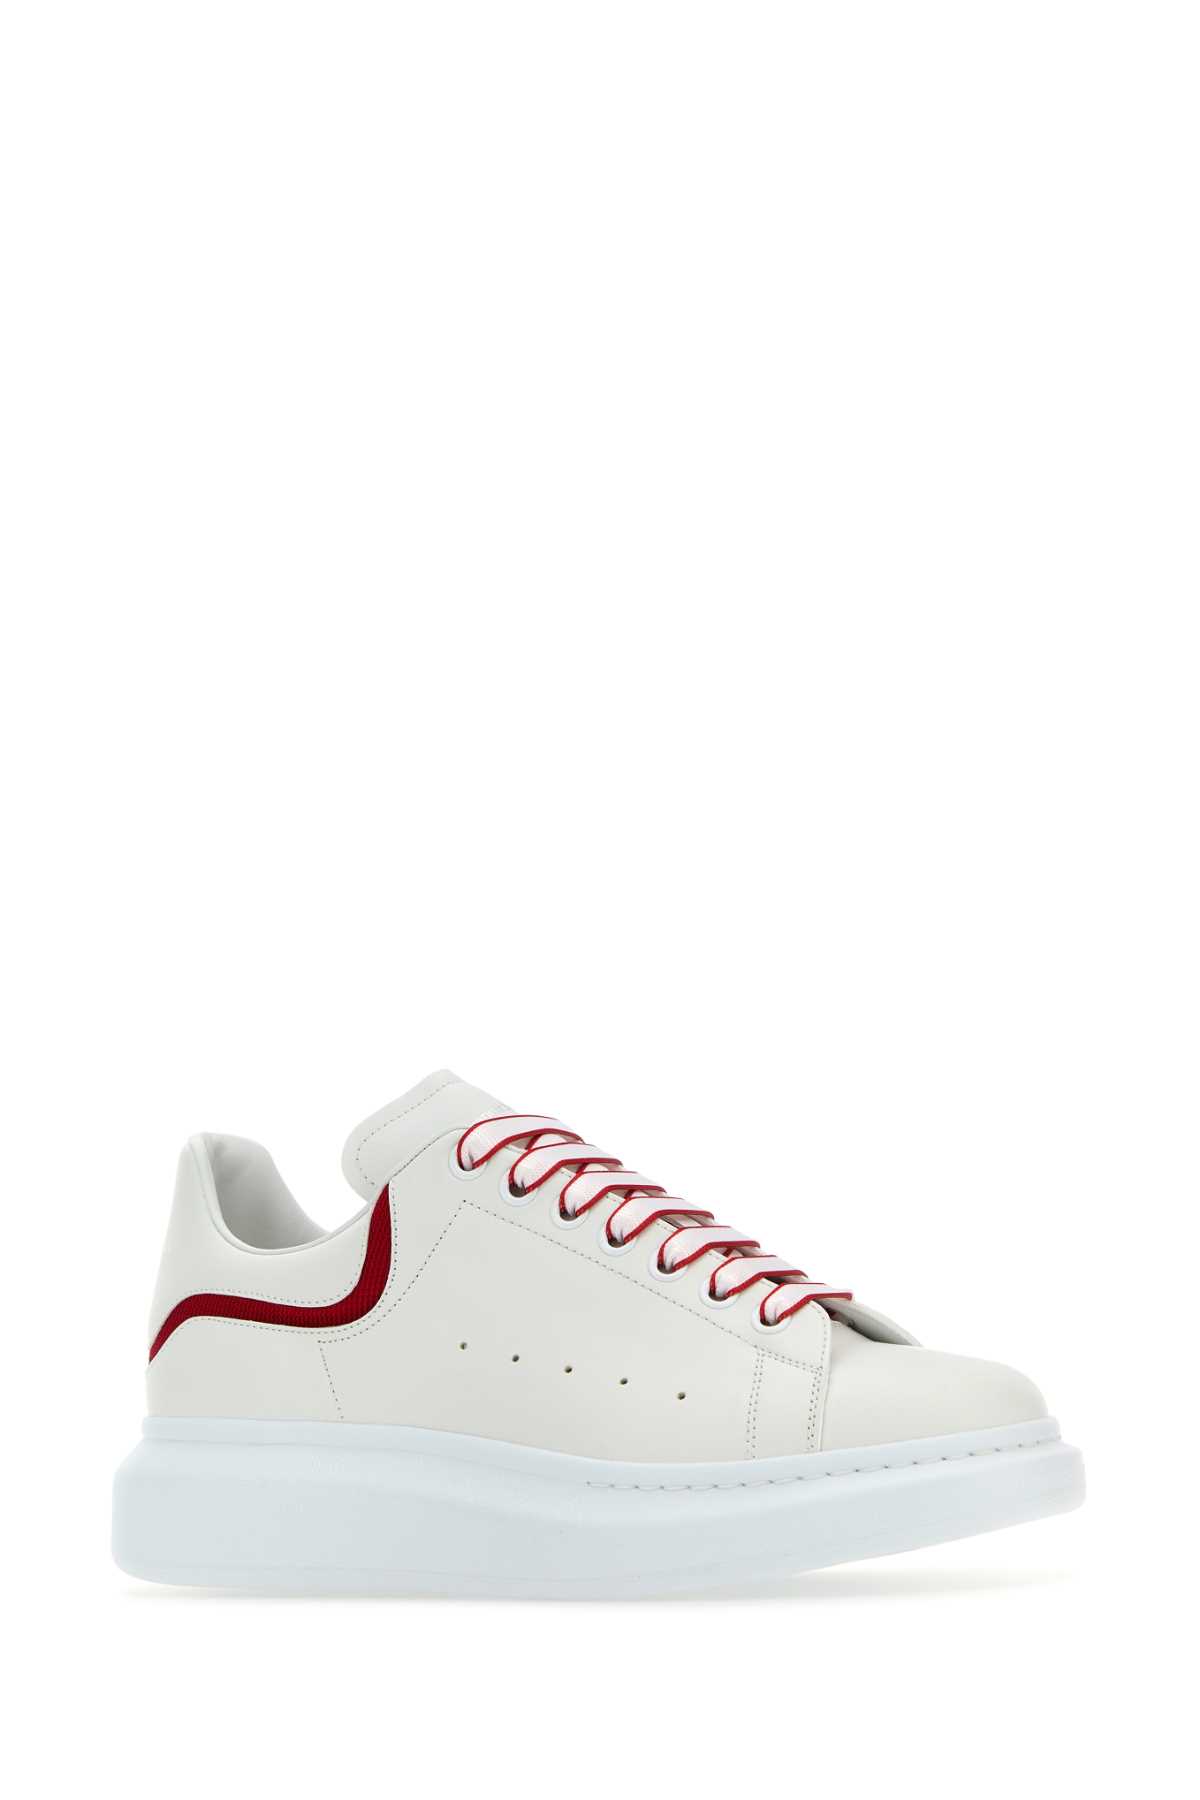 Shop Alexander Mcqueen White Leather Sneakers With White Leather Heel In Whitered